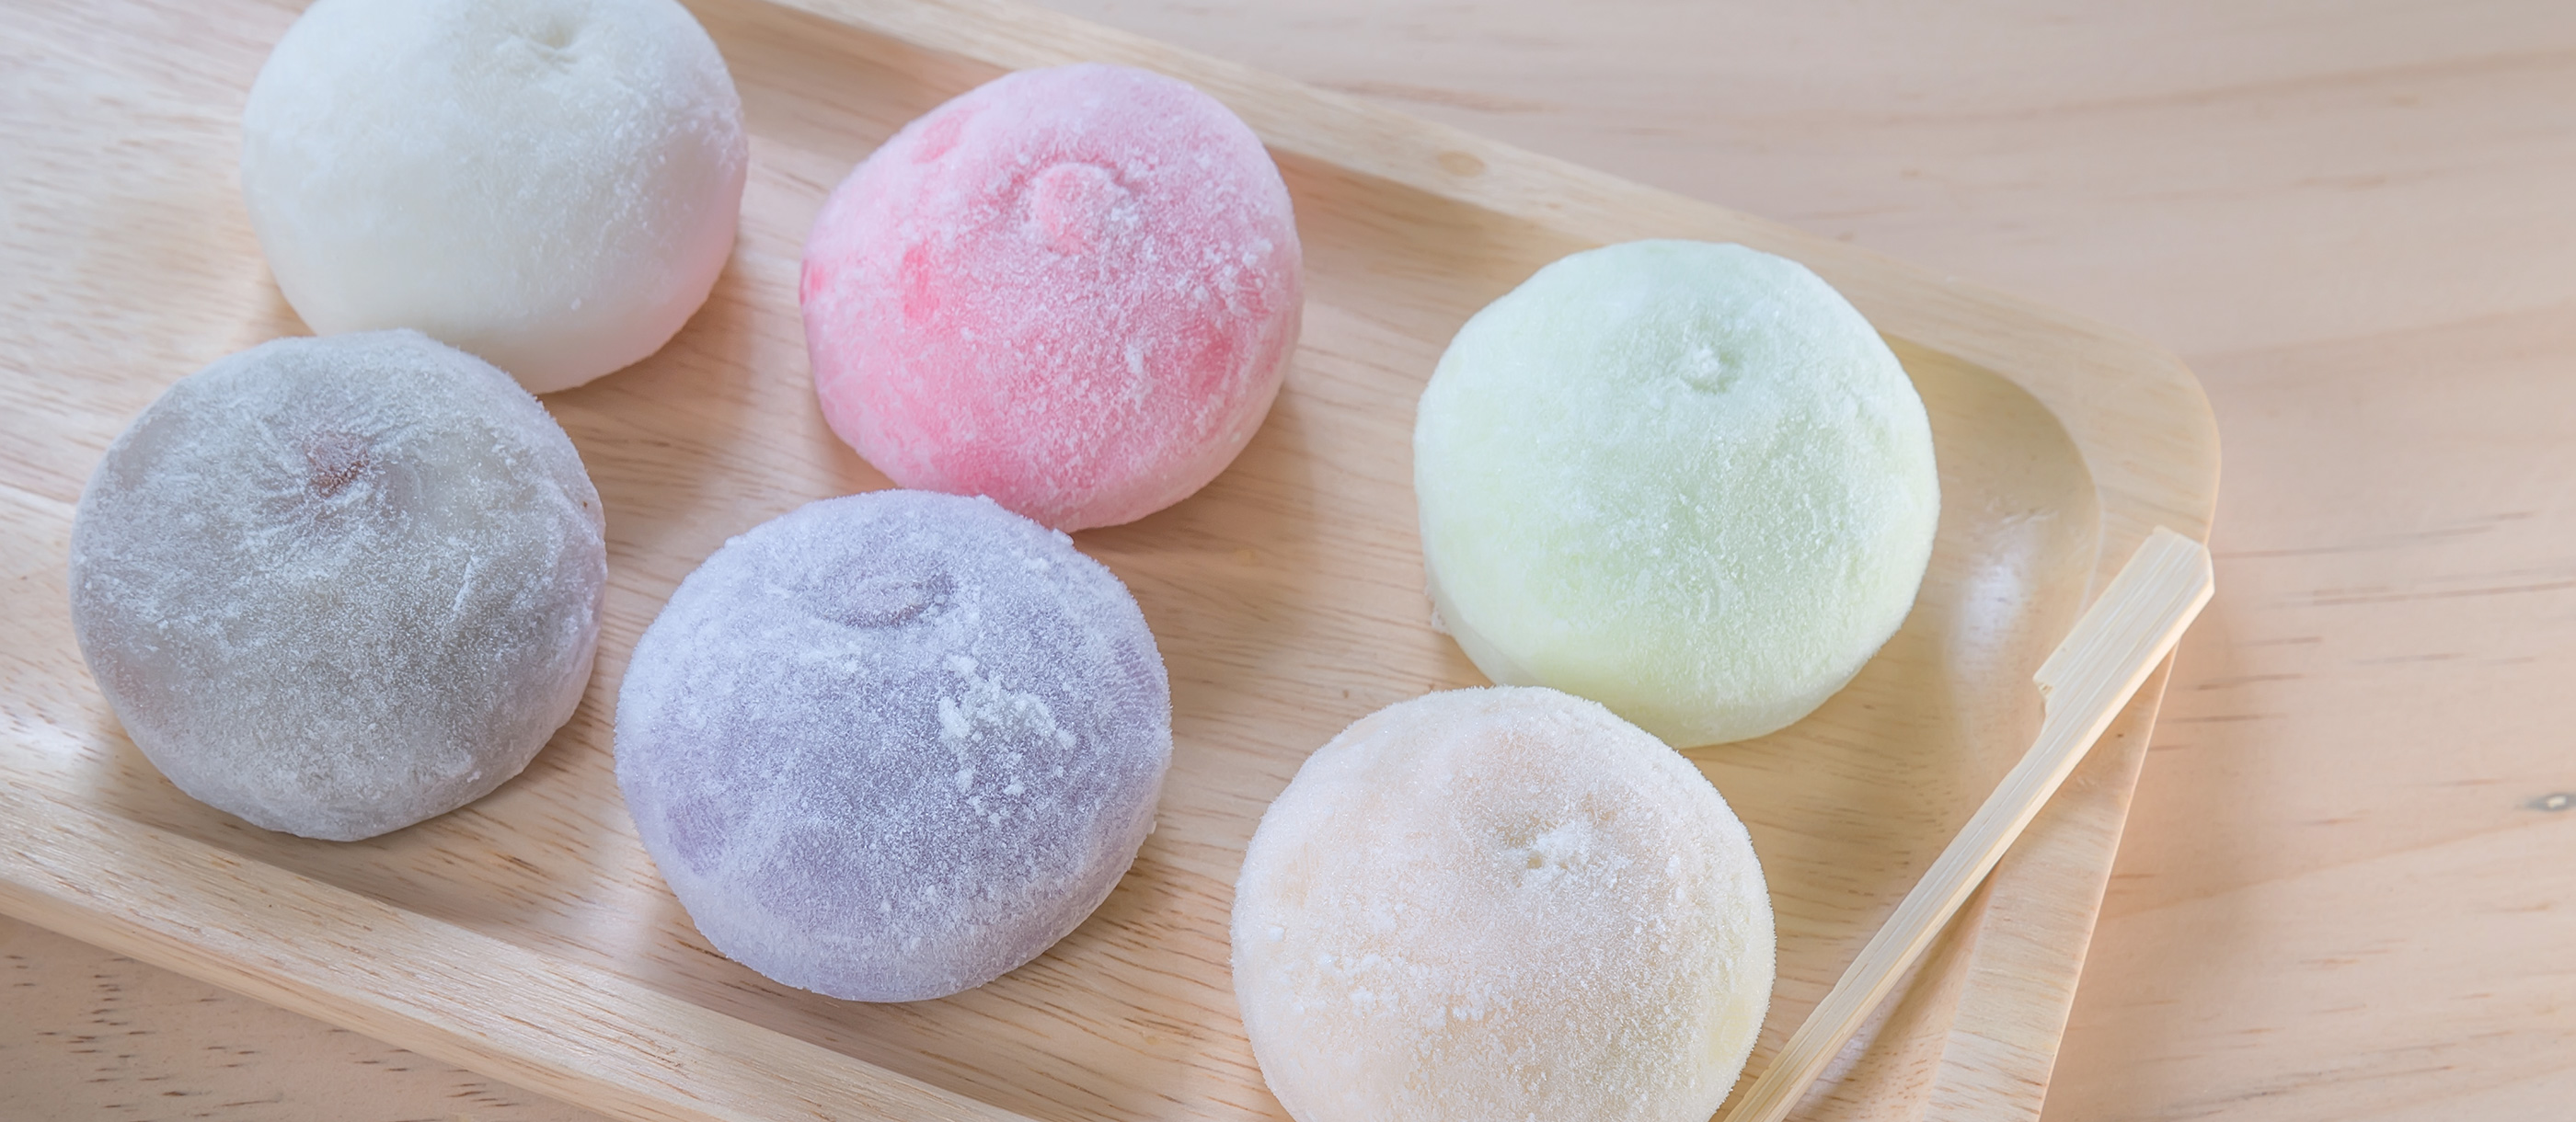 Mochi, the rice cake made in Aso is great! | 道の駅 阿蘇